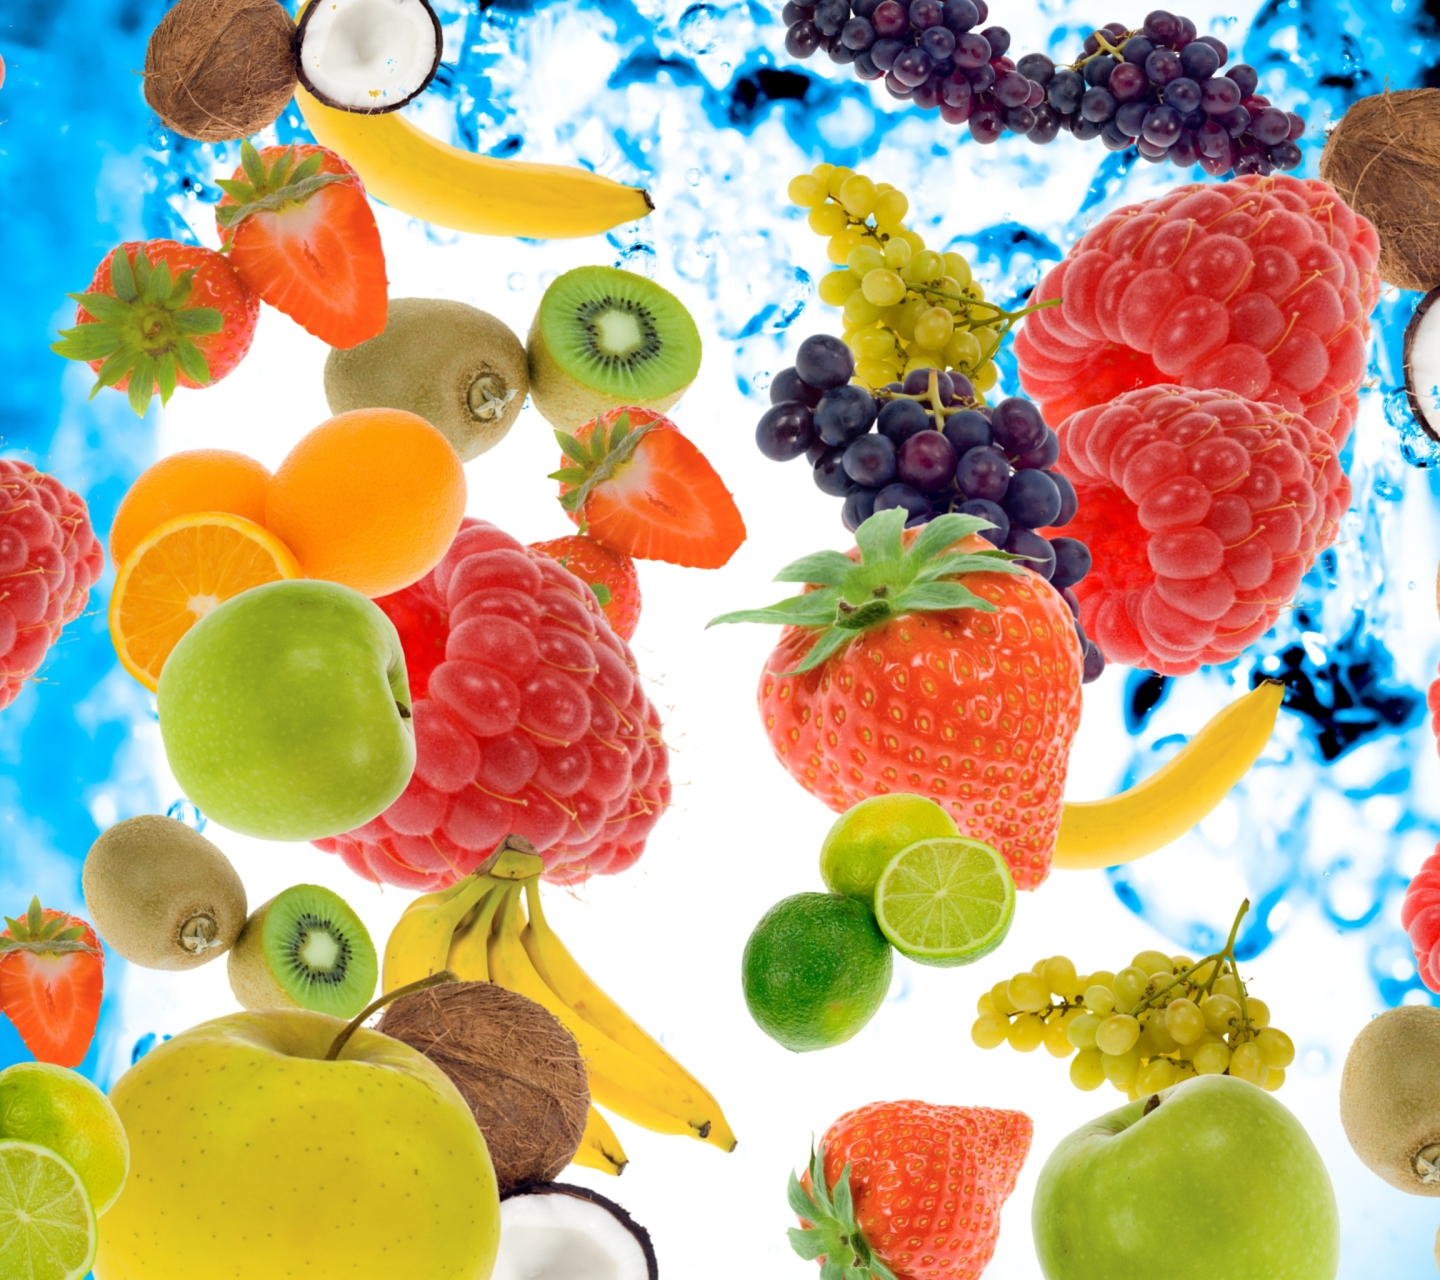 Berries And Fruits wallpaper 1440x1280